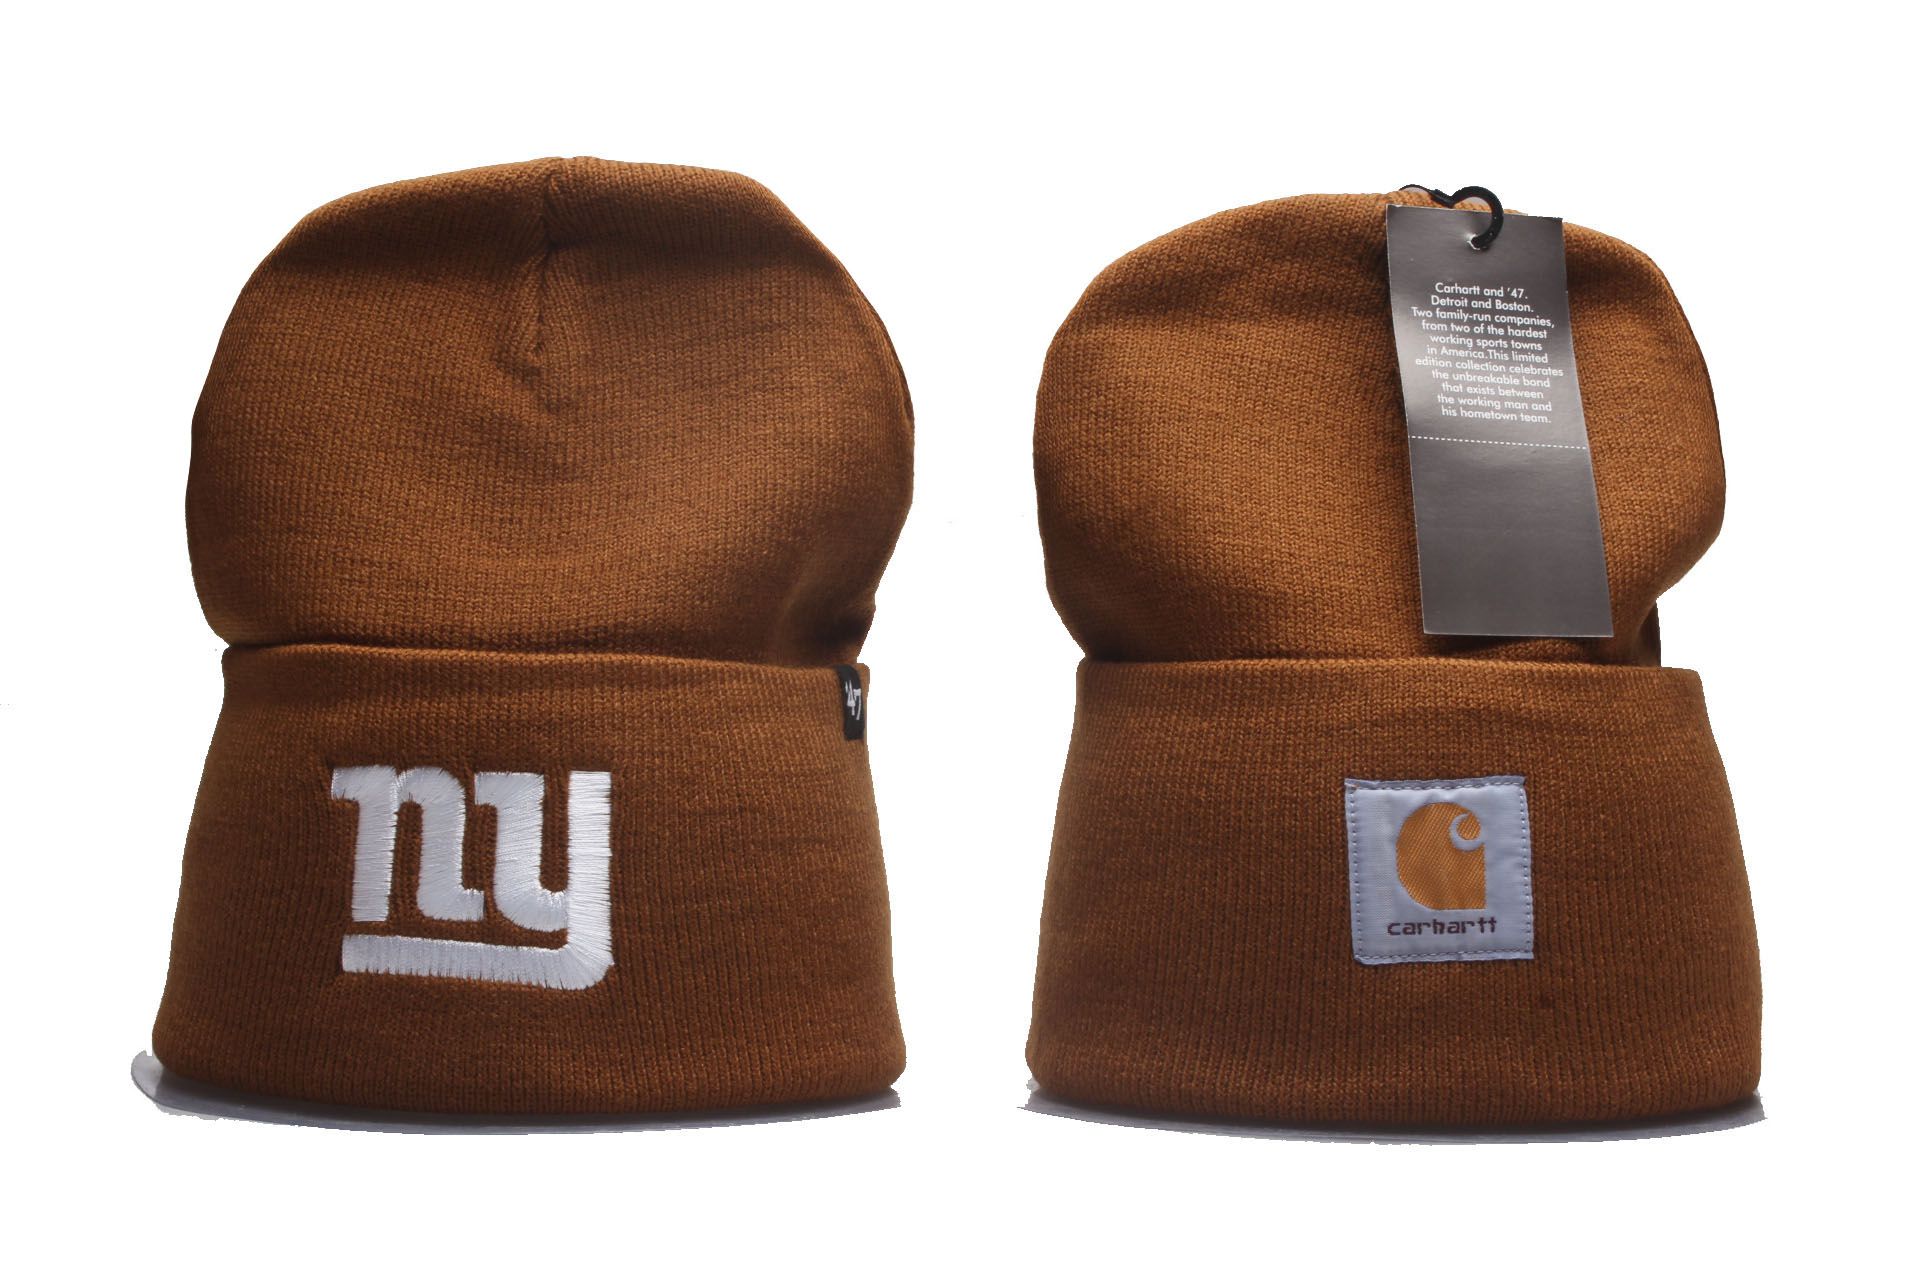 2023 NFL New York Giants beanies ypmy